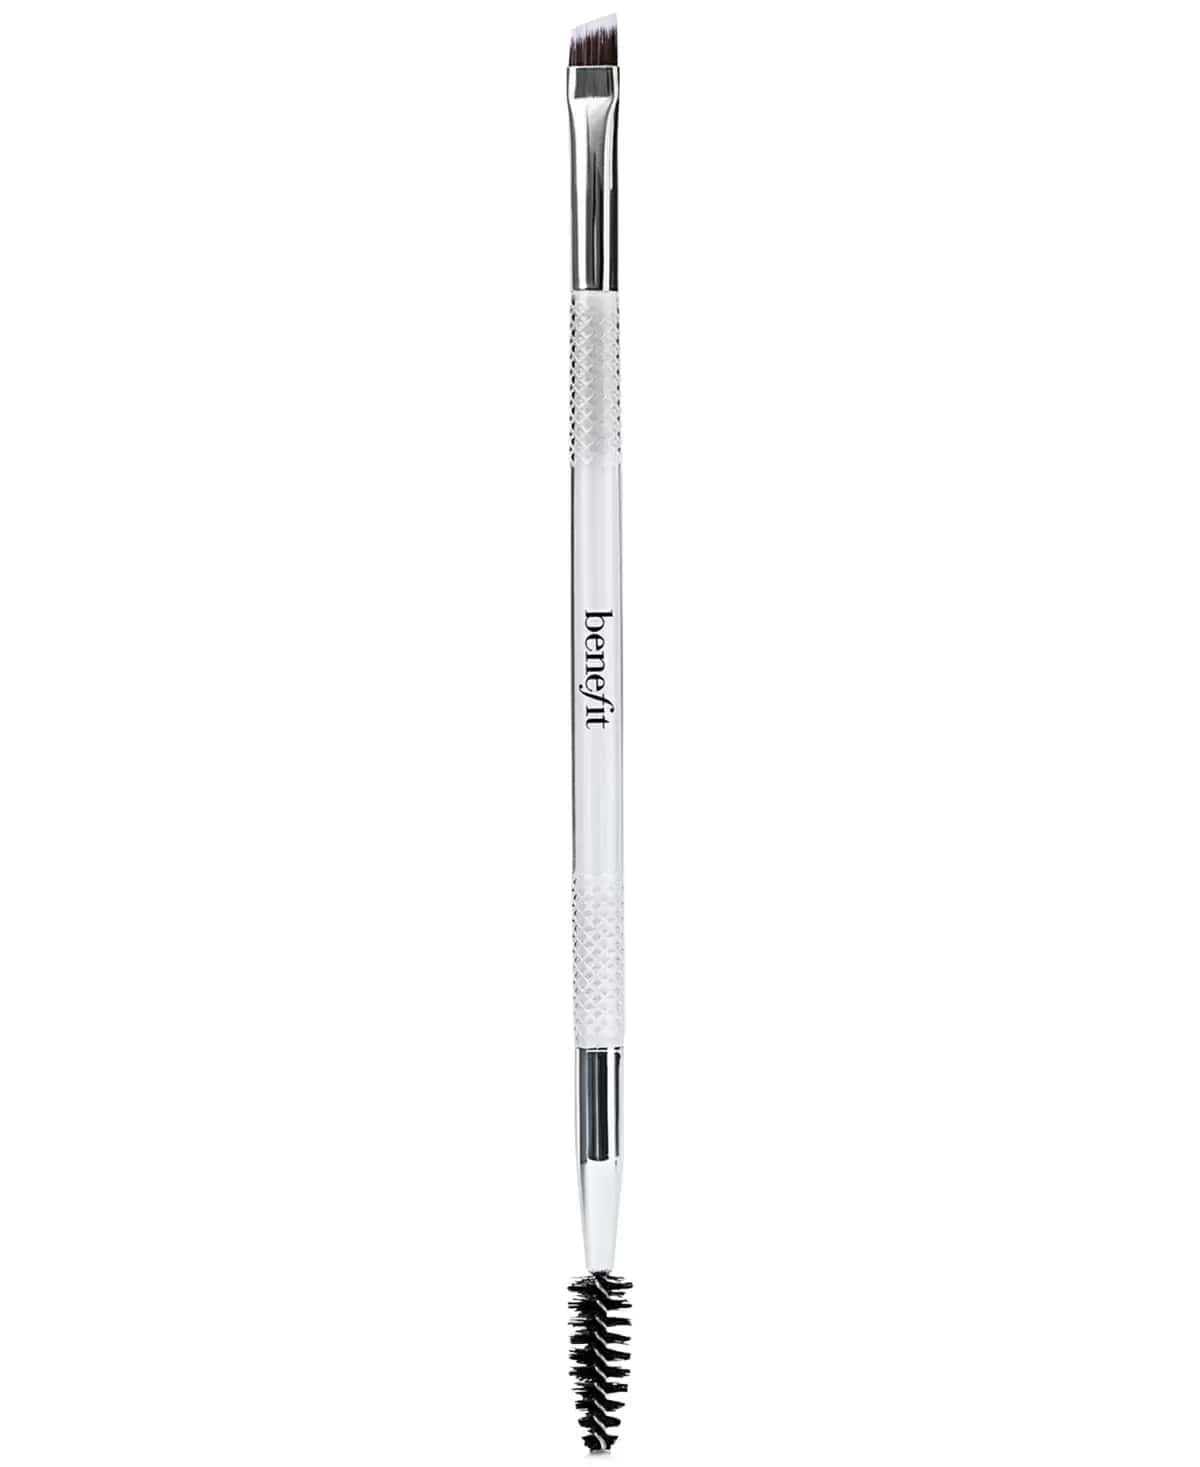 Dual-Ended Angled Eyebrow Brush by Benefit Cosmetics